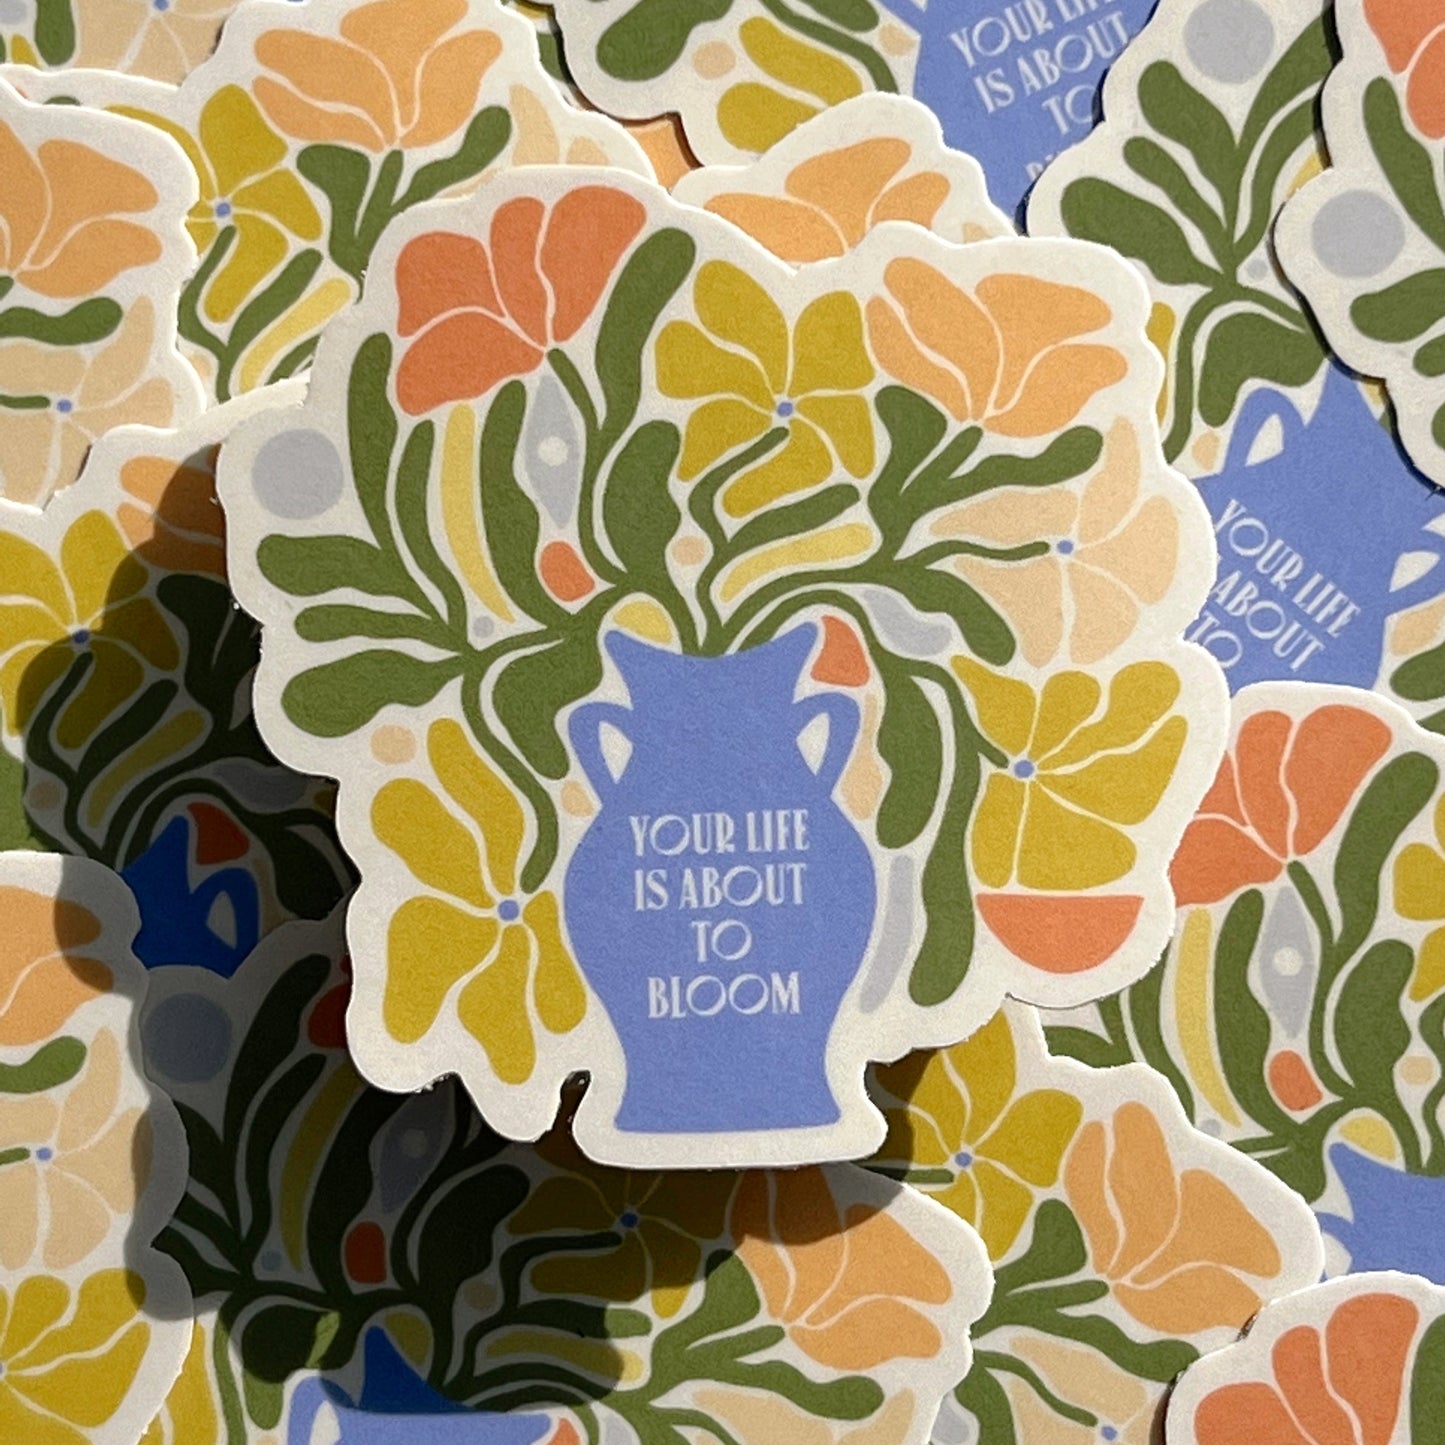 Your Life Is About To Bloom - Vinyl Sticker